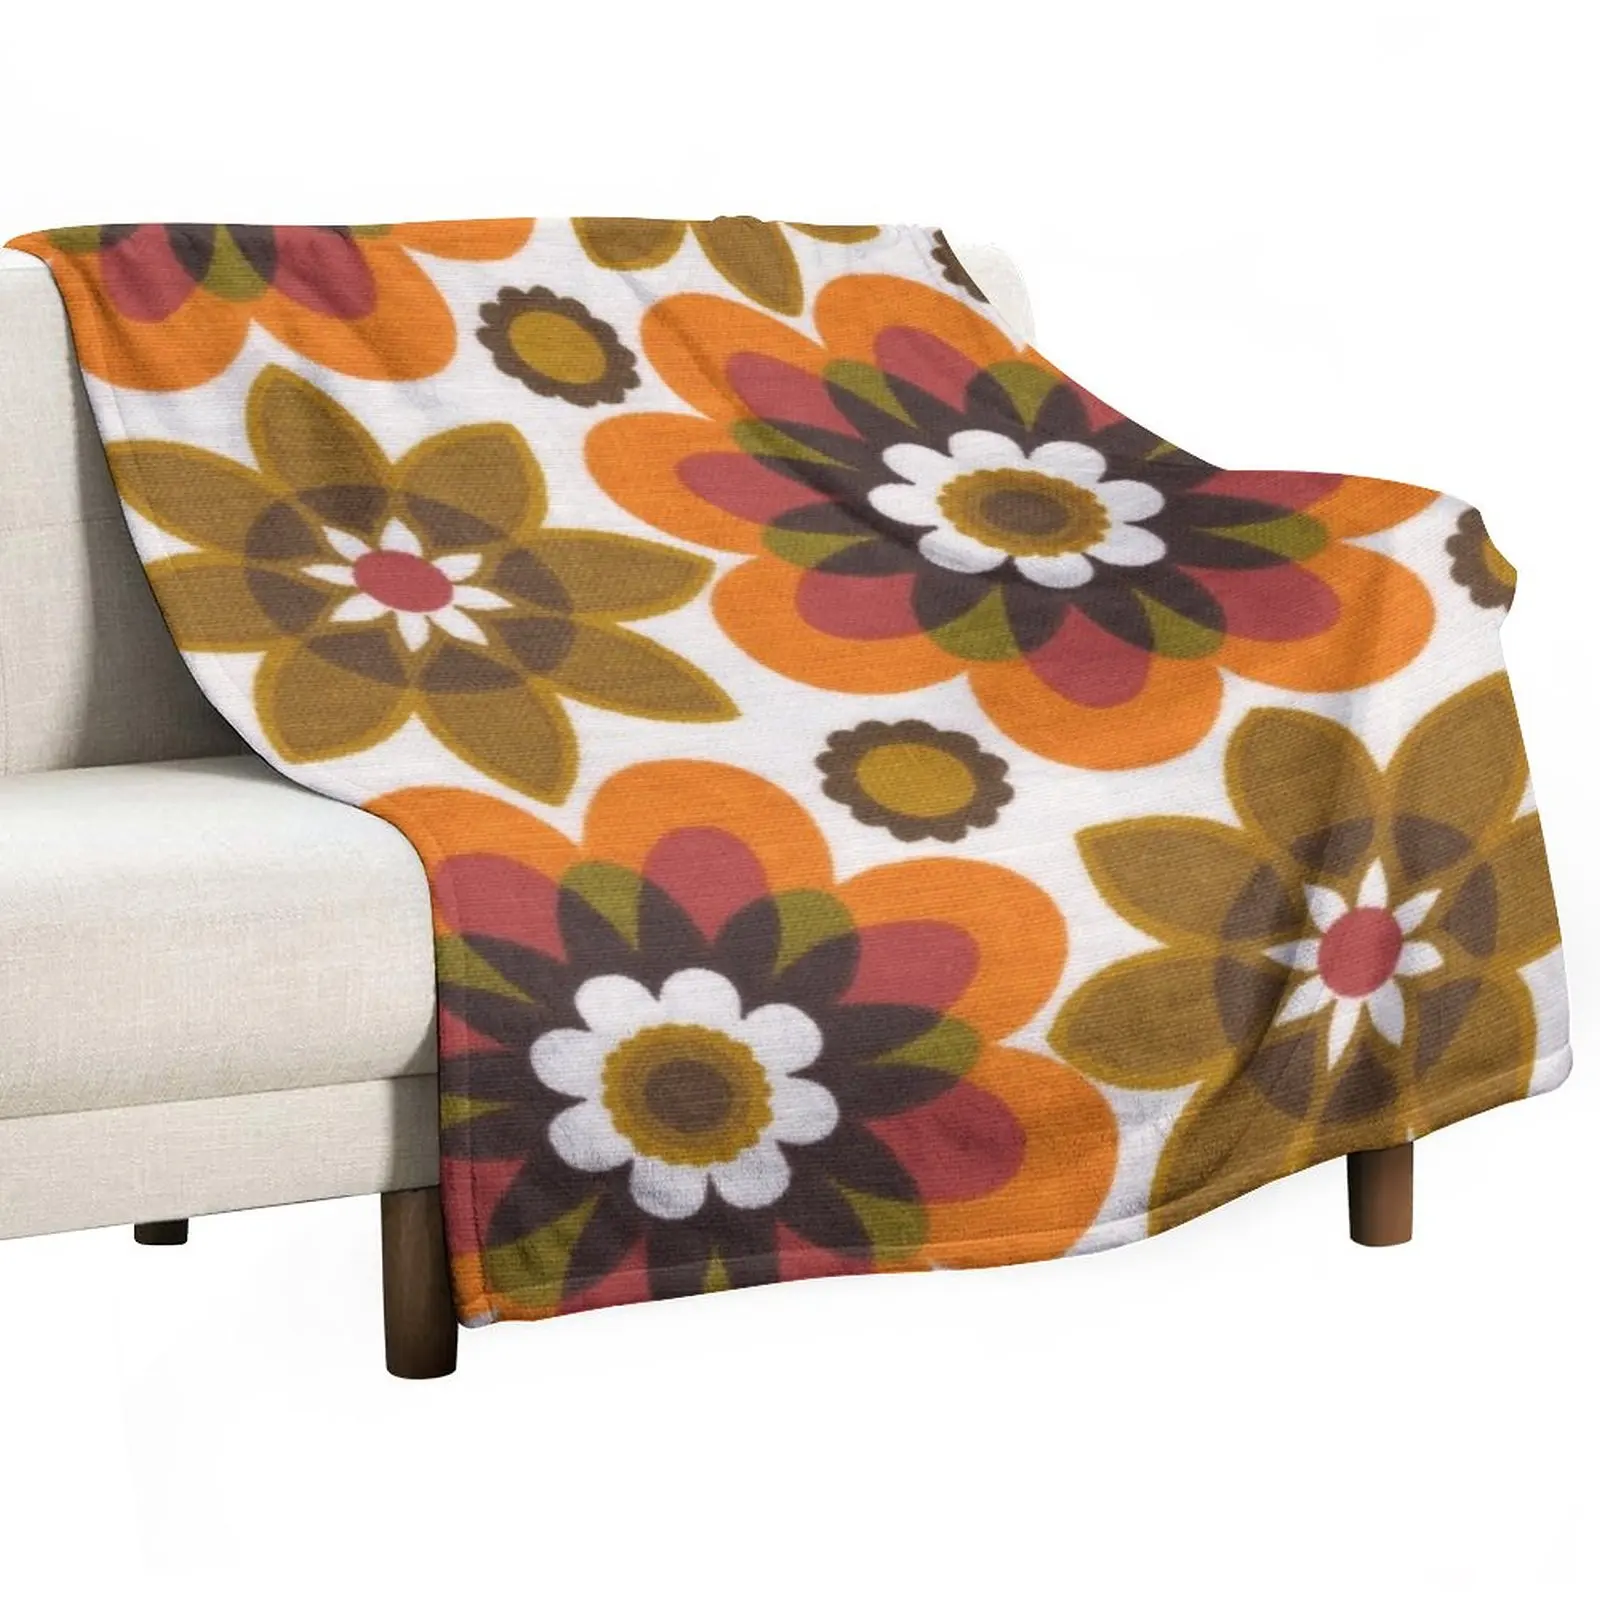 

Hippie chic flowers Throw Blanket Warm Blankets Sofas Of Decoration For Sofa Thin Blankets